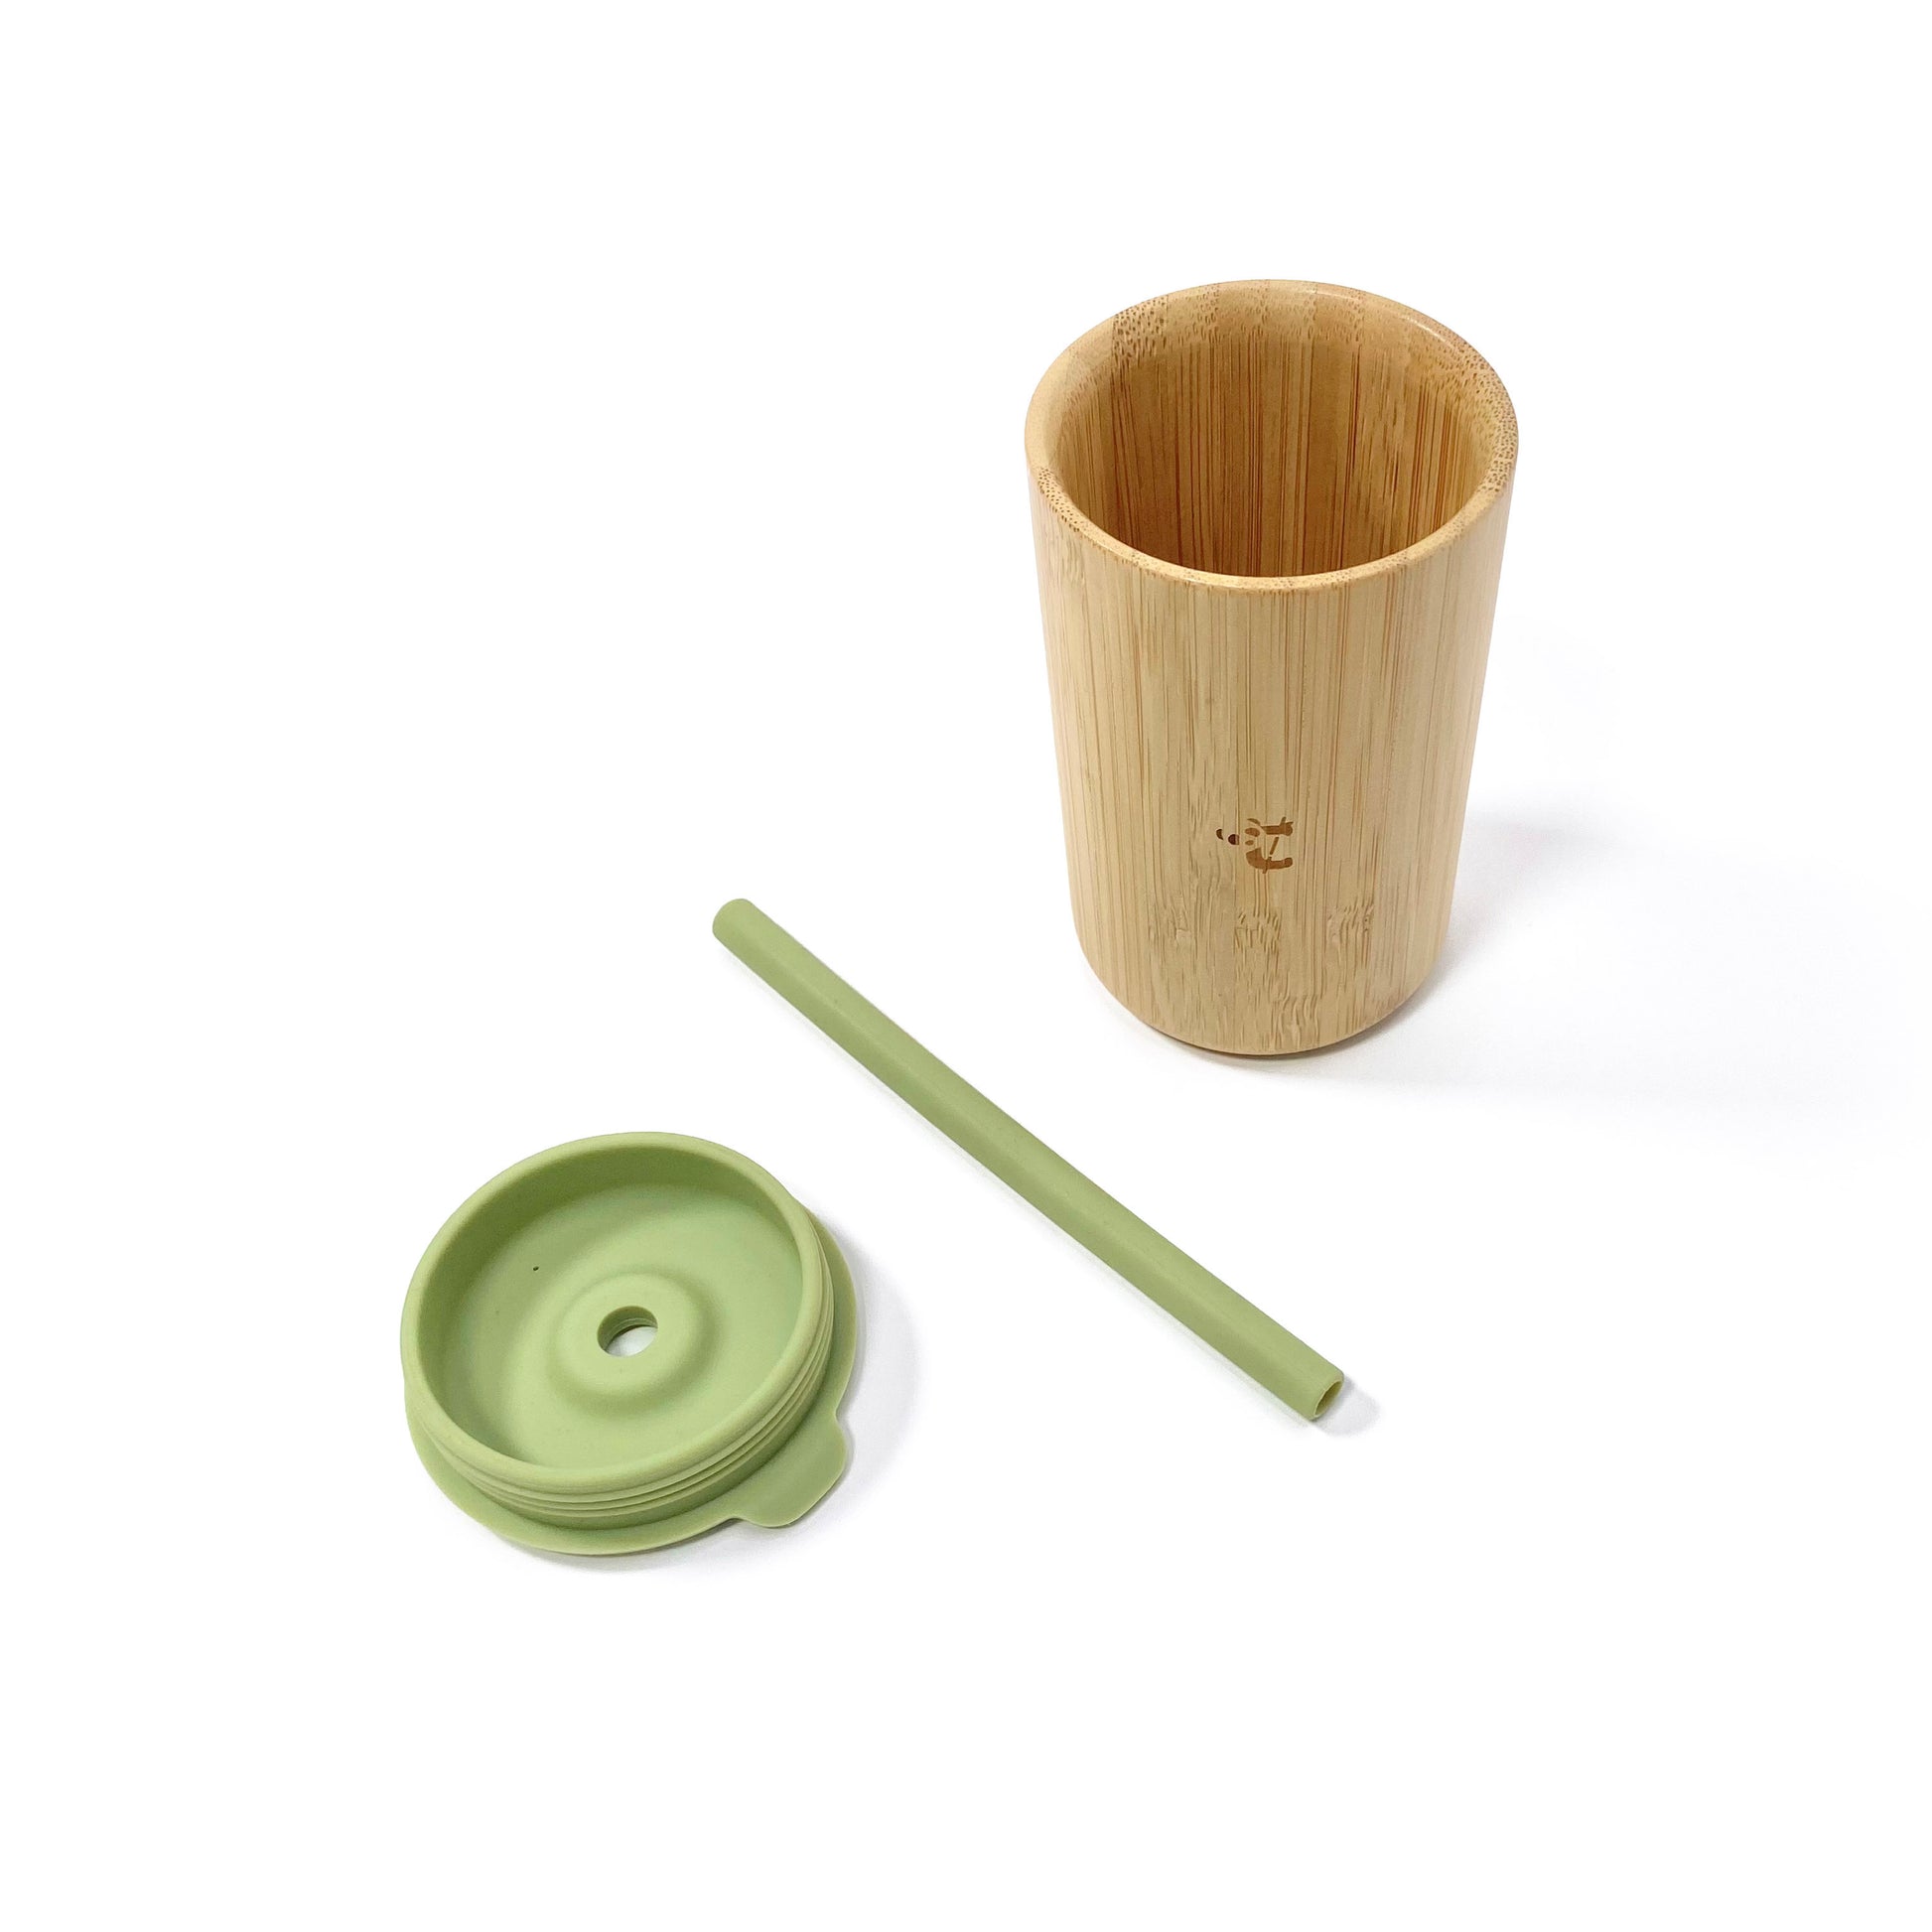 A children’s bamboo drinking cup, with an olive green silicone lid and matching straw. View shows the cup, lid and straw separately.